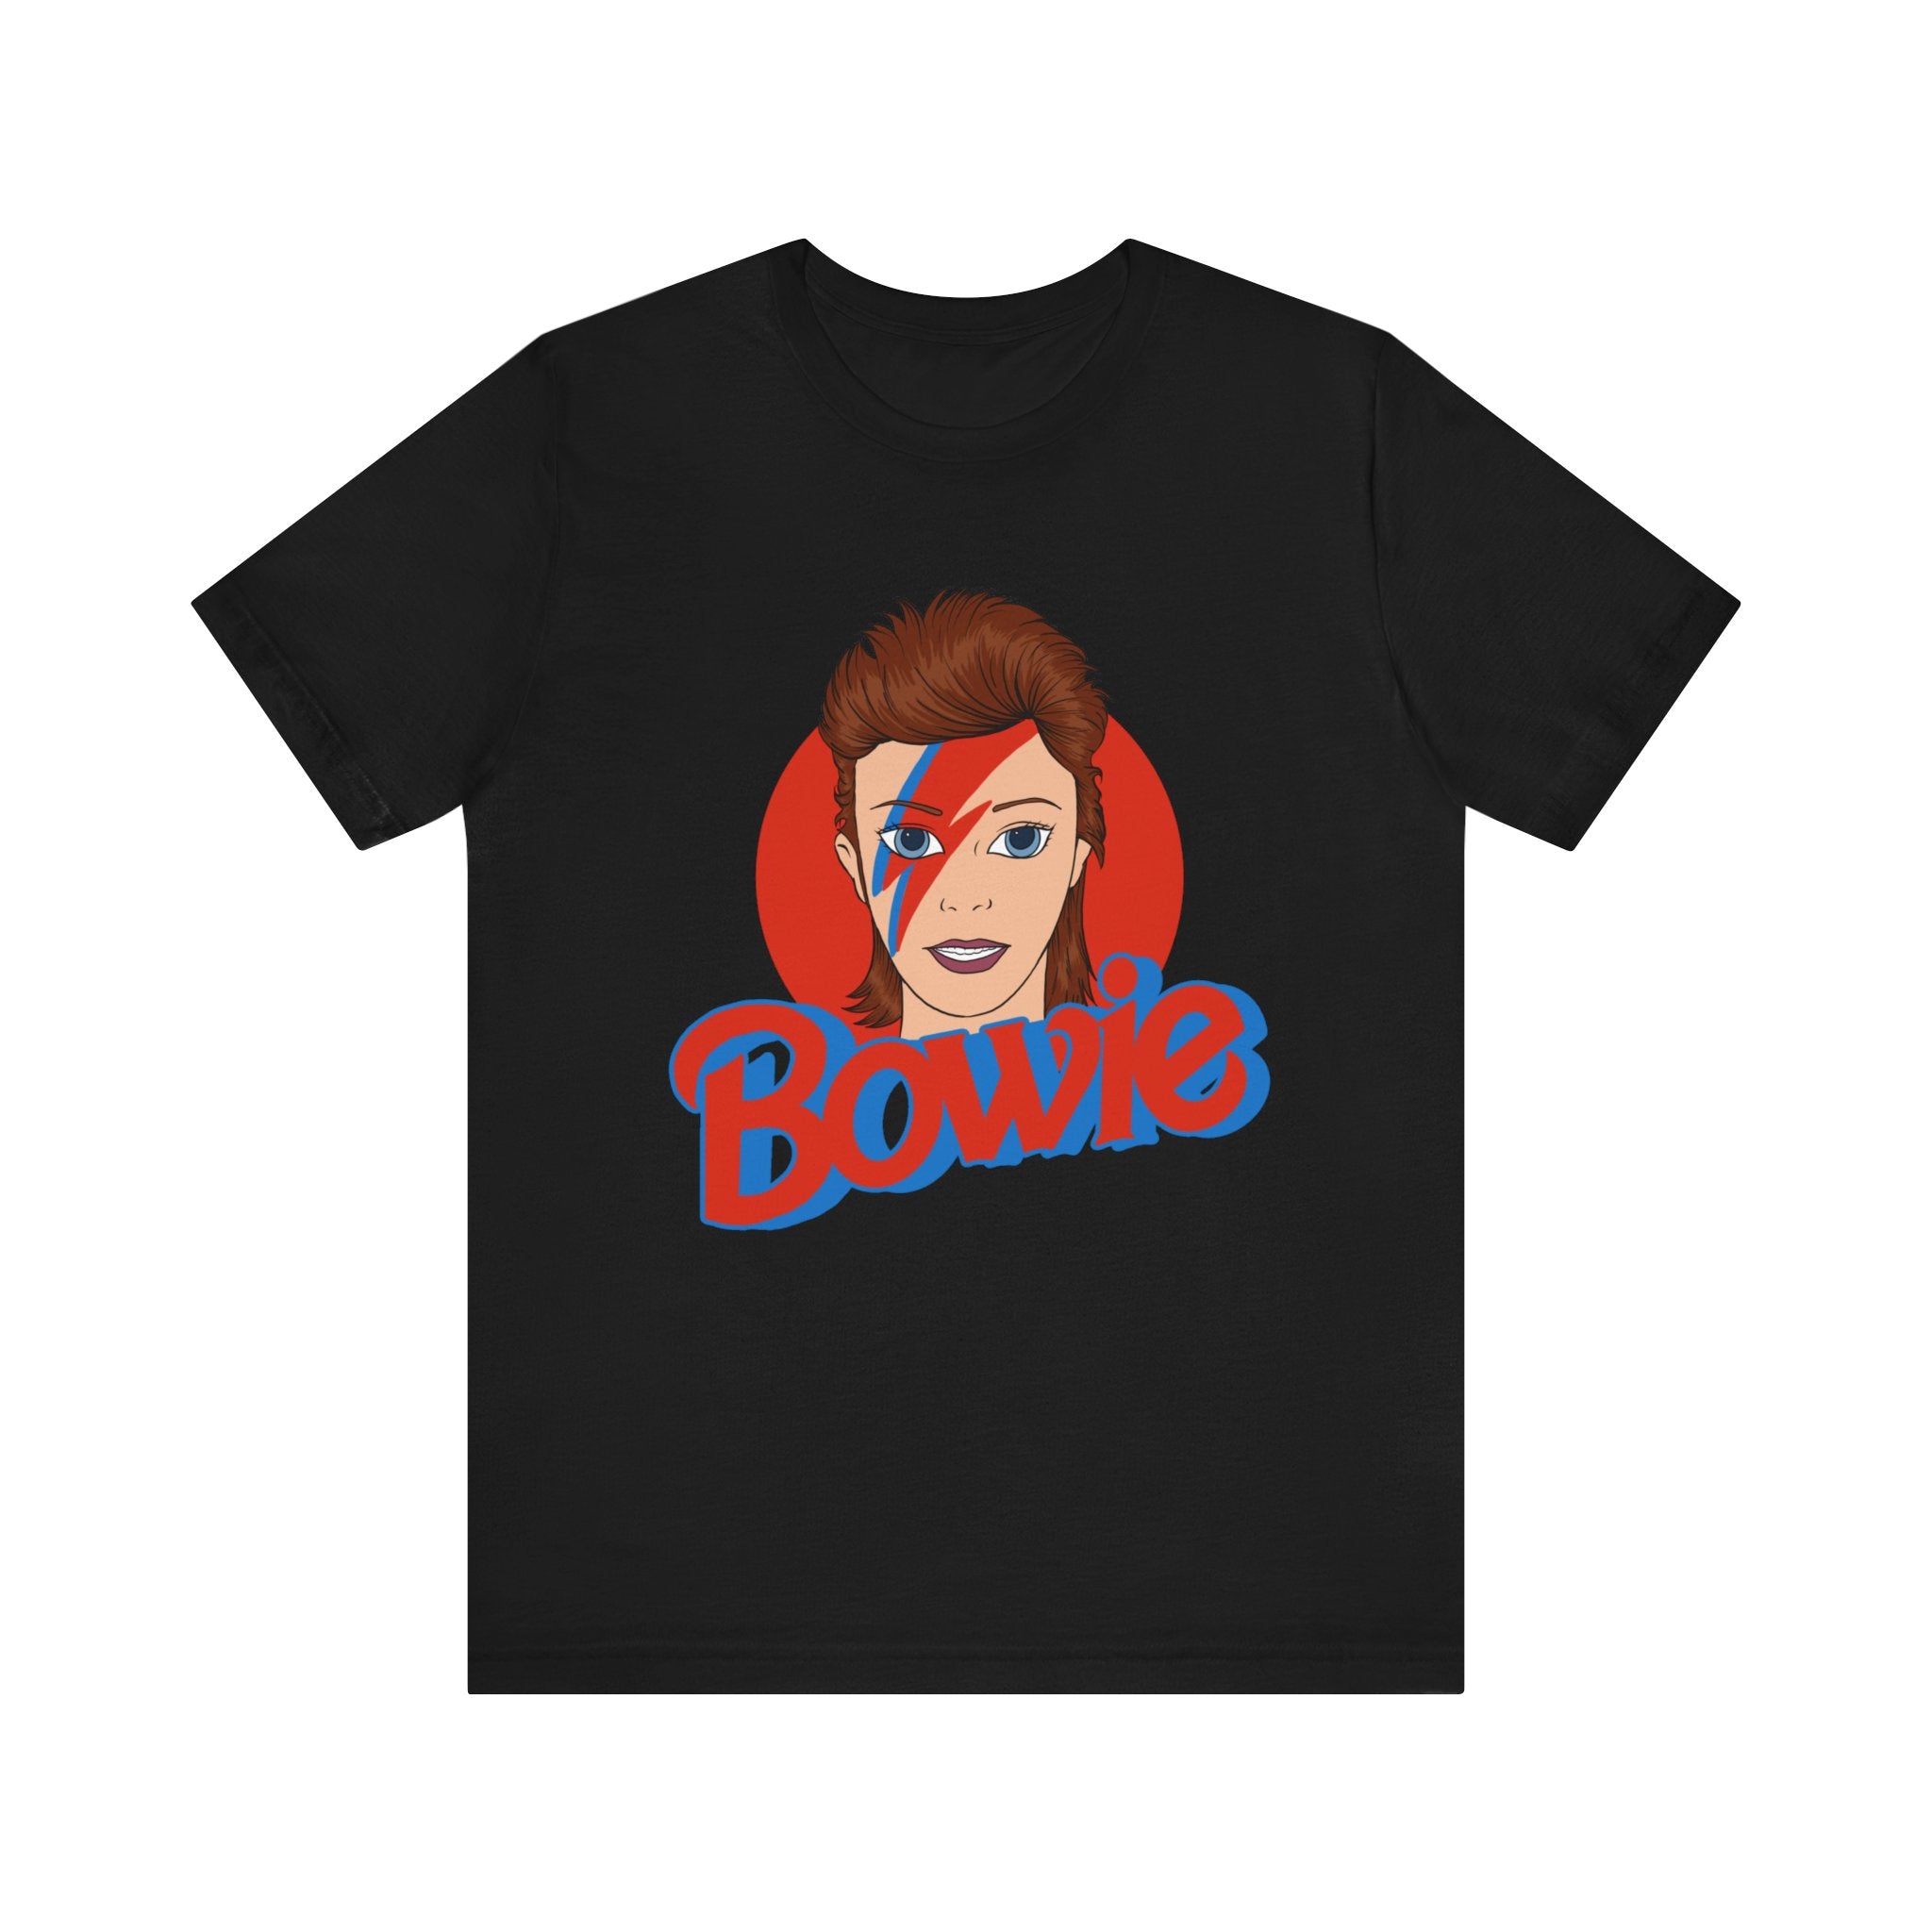 Unisex Bowie T-Shirt featuring a graphic of David Bowie with his iconic red hair and blue eye makeup, along with the text "Bowie" in blue.